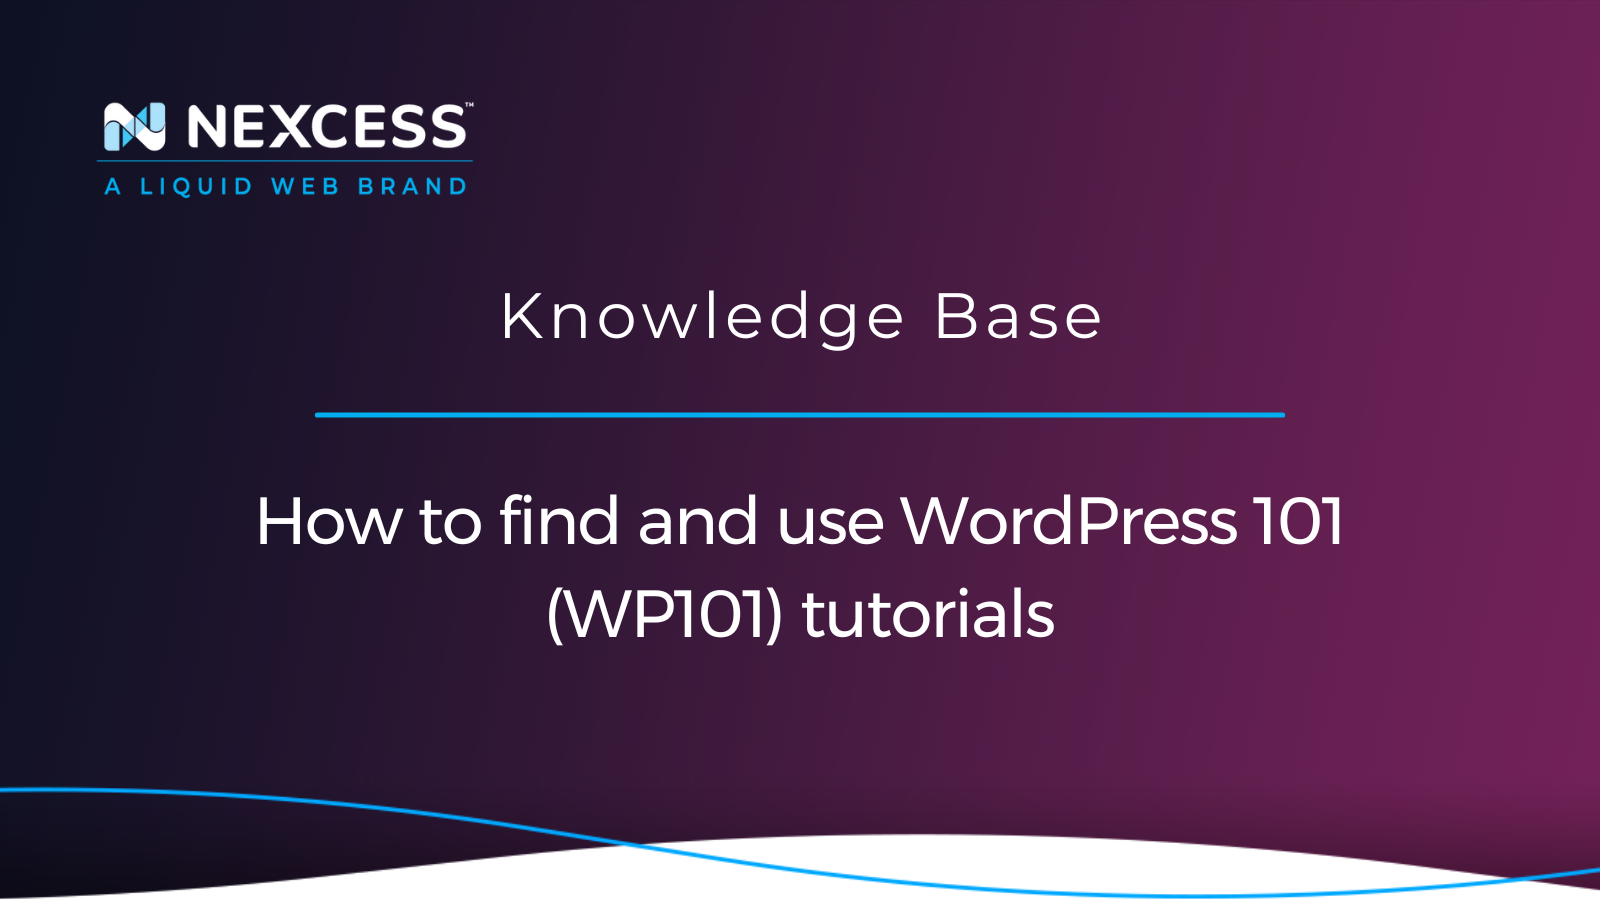 How to find and use WordPress 101 (WP101) tutorials